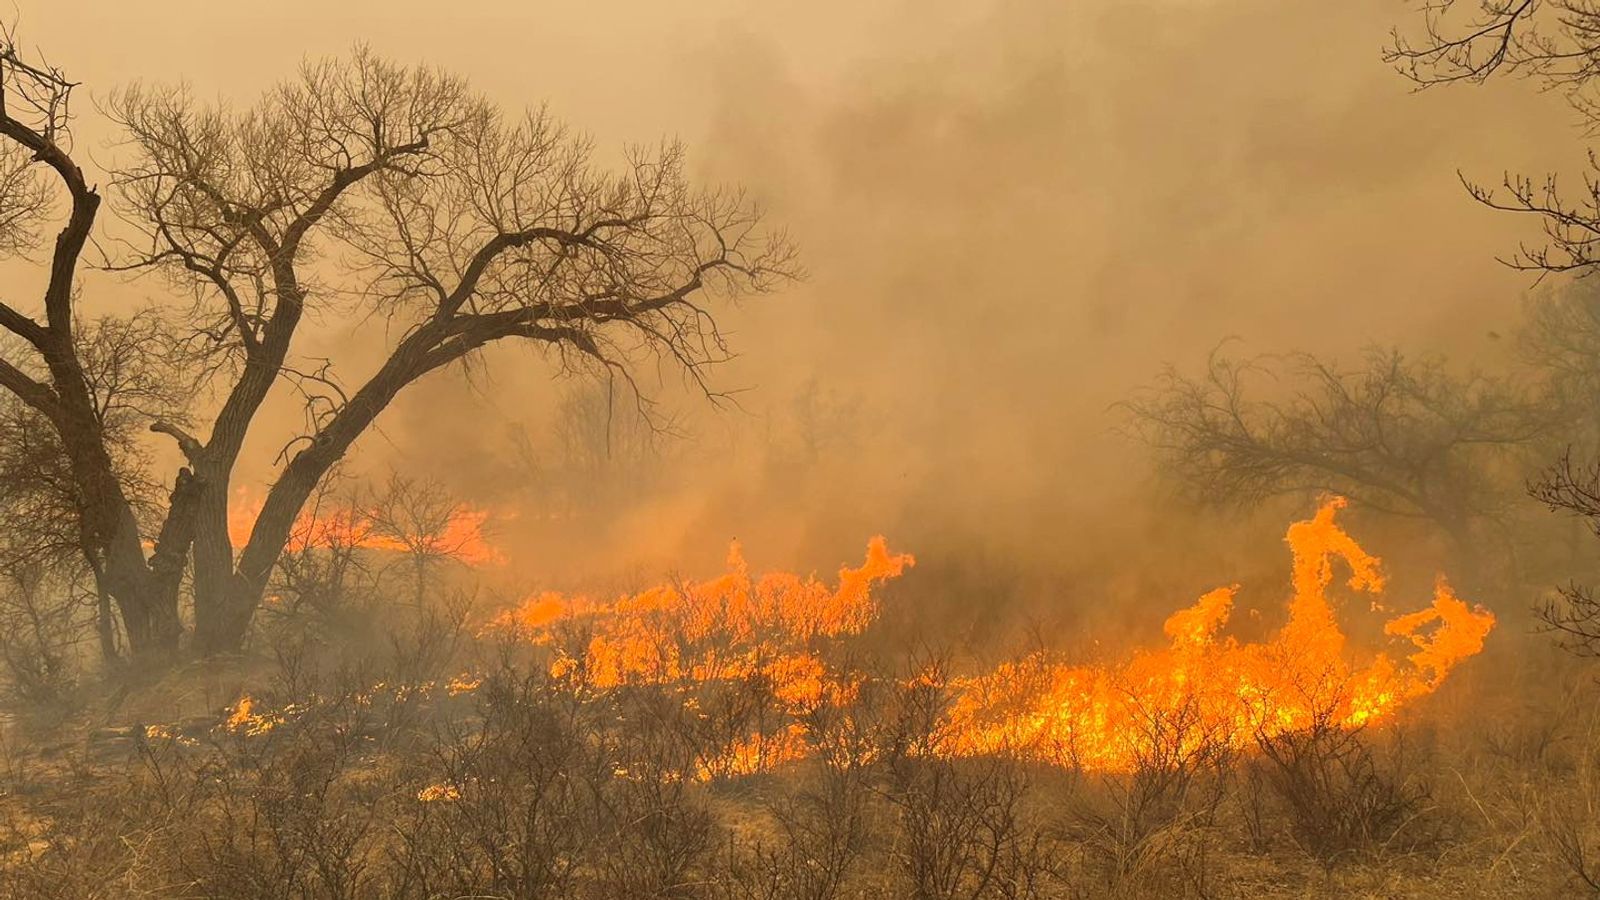 disaster declared and nuclear weapons plant shut down as texas battles wildfires